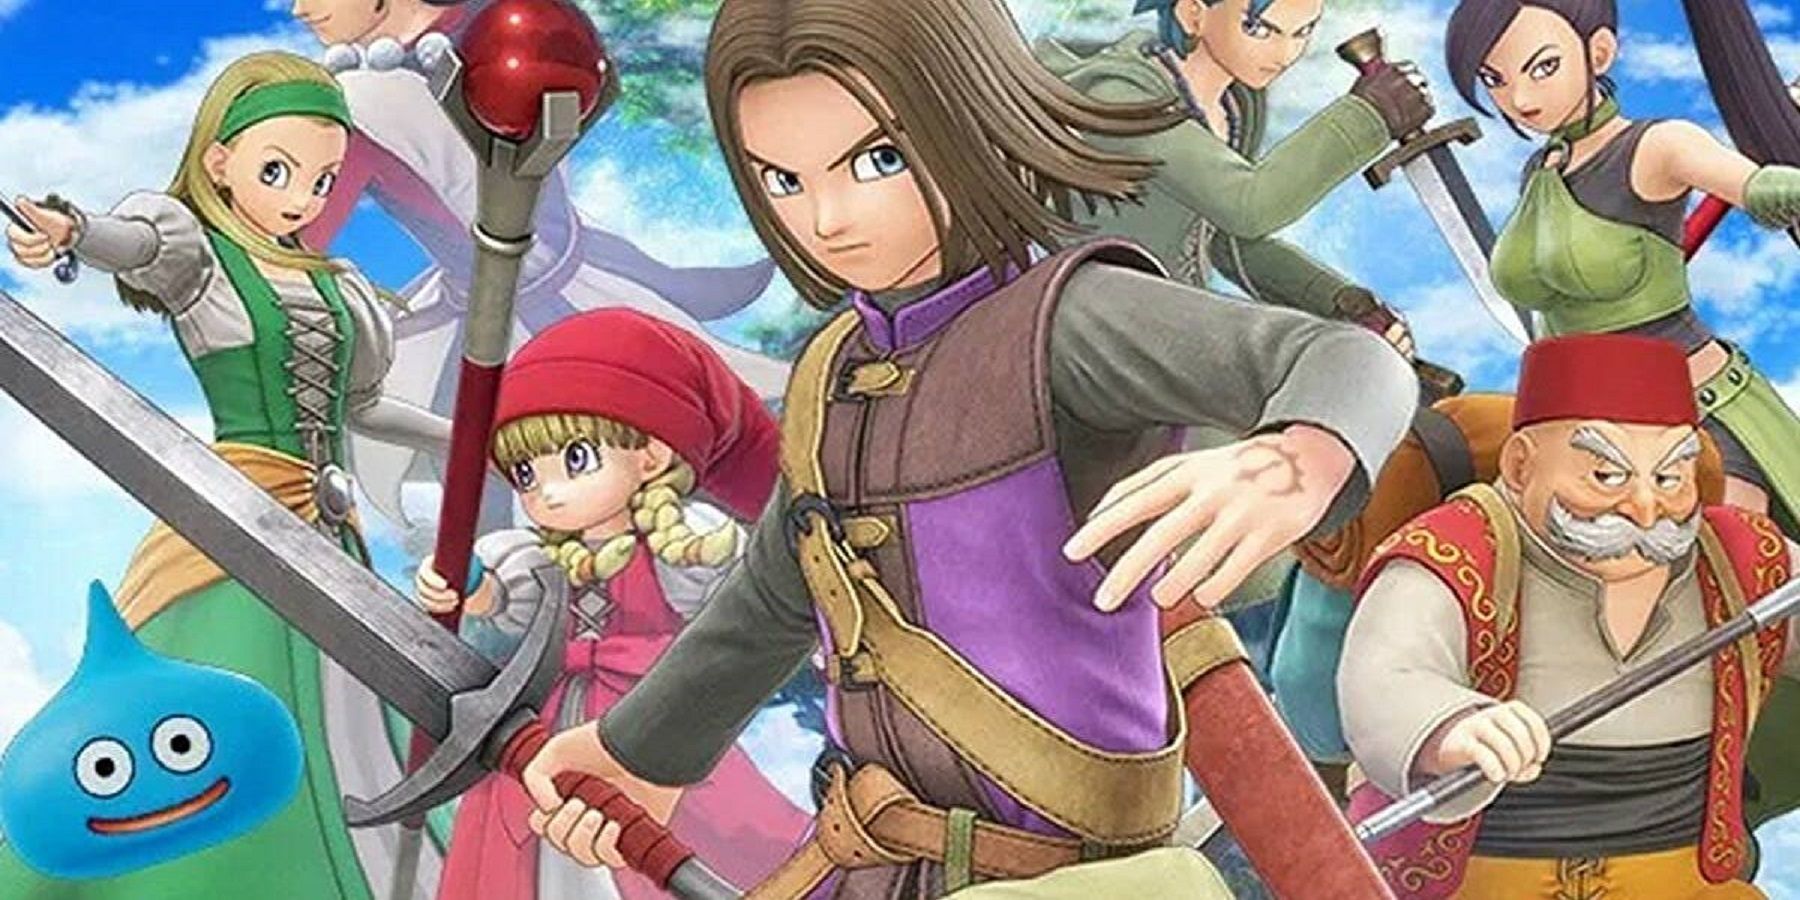 Dragon Quest 11 characters